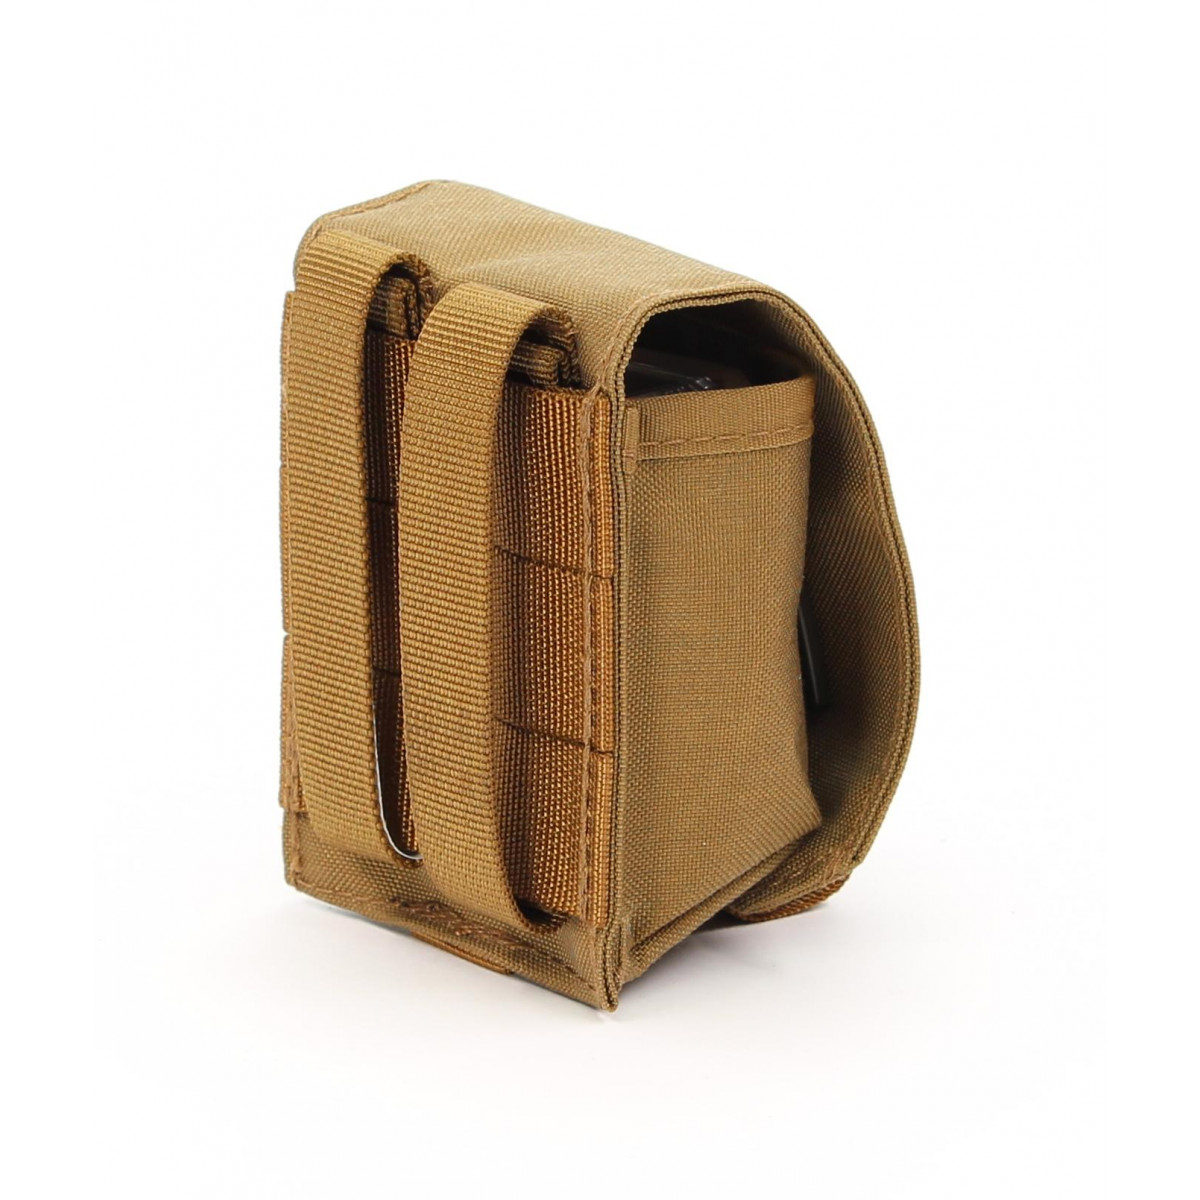 Zentauron hand grenade pouch Molle pouch with buckle color Coyote brown (1674)